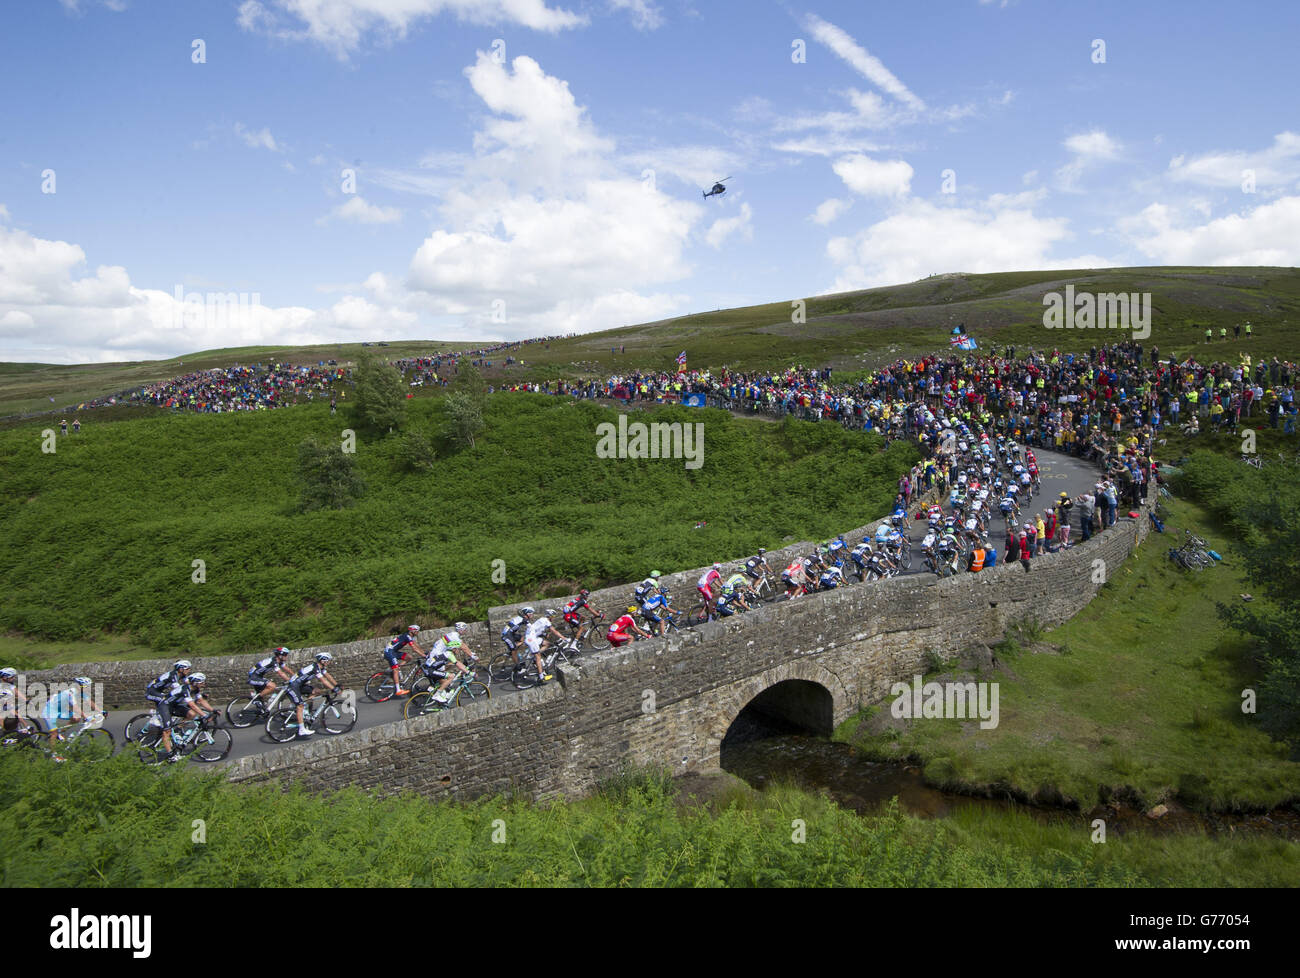 Cycling - Tour de France - Stage One - Leeds to Harrogate. The peloton rides over a bridge on Grinton Moor as stage one of the Tour de France passes over the Grinton Moor, Yorkshire. Stock Photo